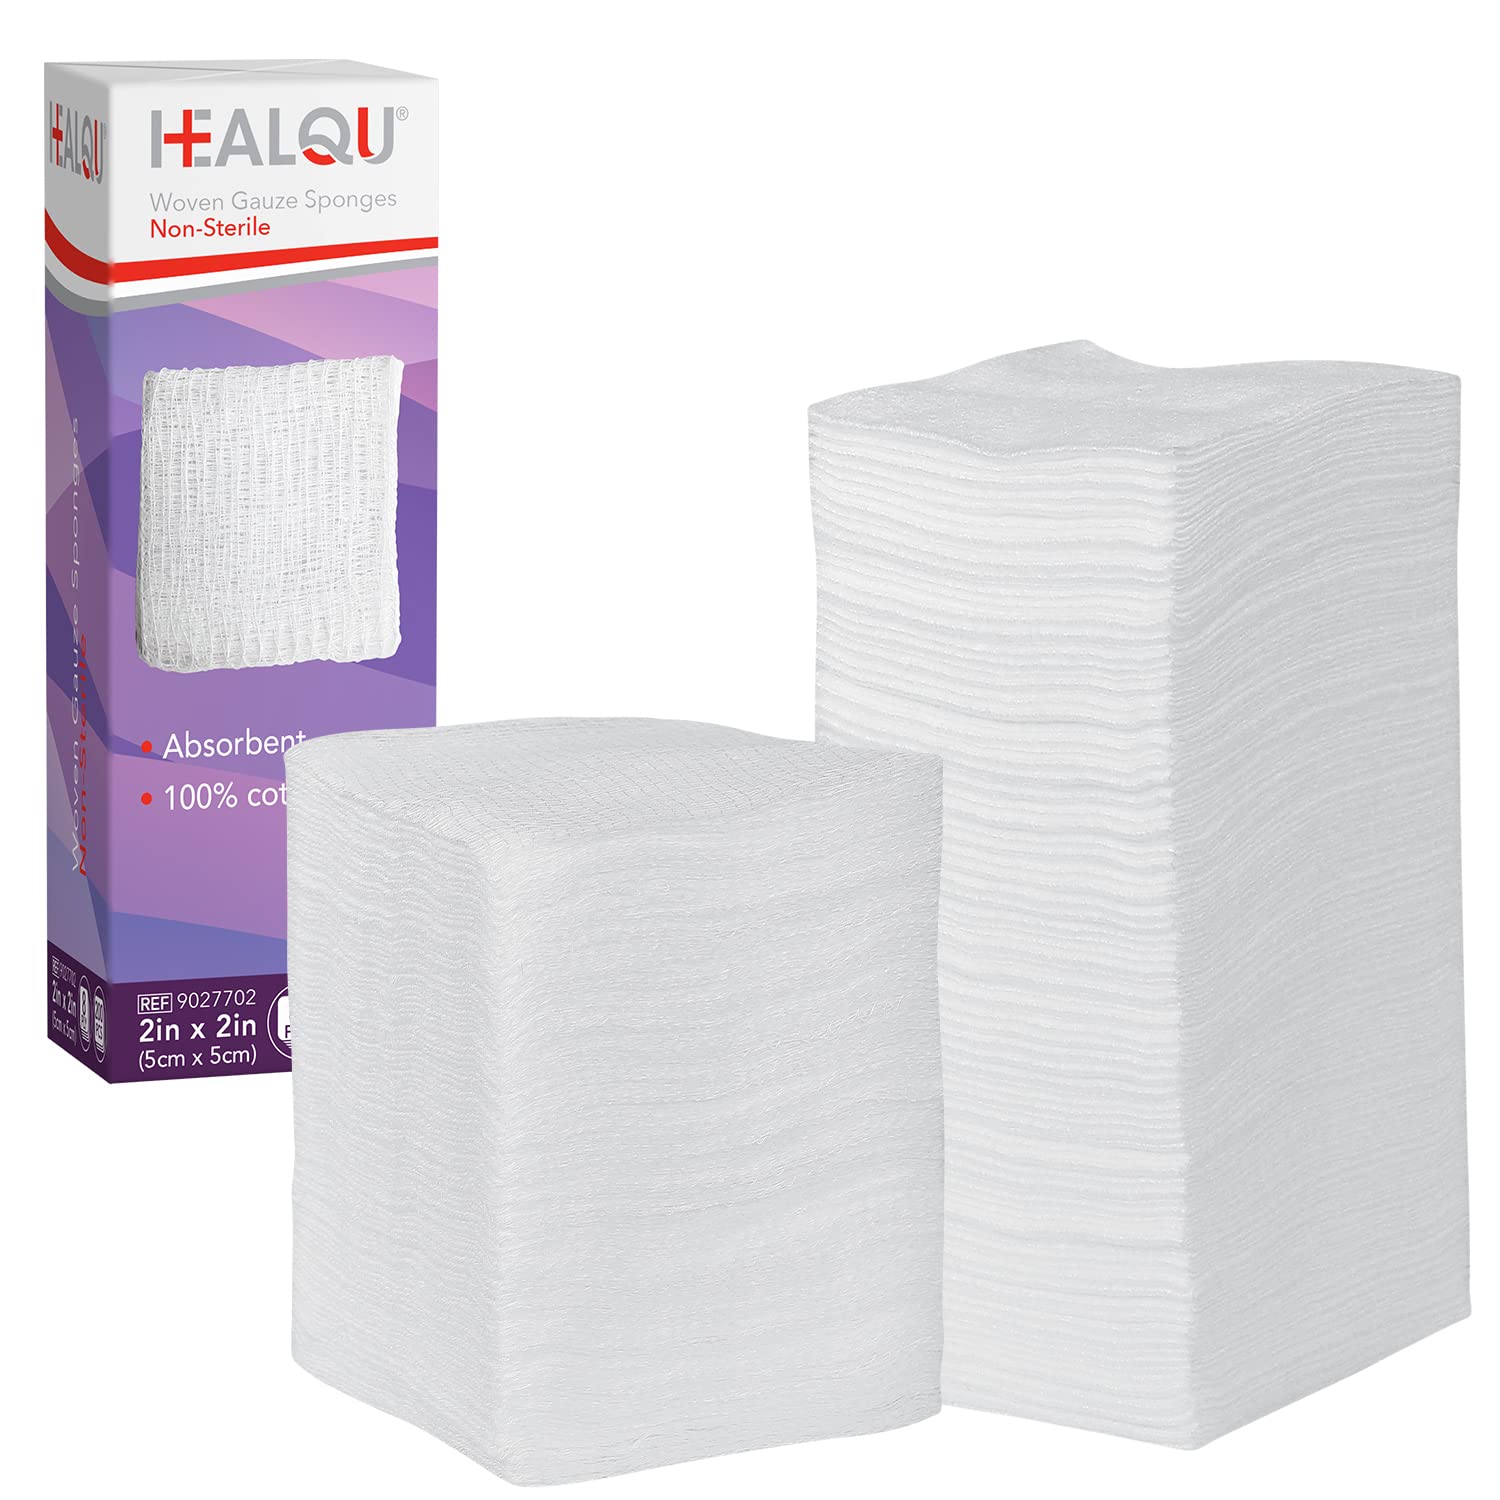 HEALQU Gauze Pads 2x2 Pack of 200 8 Ply - Non-Sterile Woven Surgical  Sponges for Wound Dressing Debridement Cleaning Prepping - Medical Gauze  Sponges 2x2 Bag of 200 8 Ply